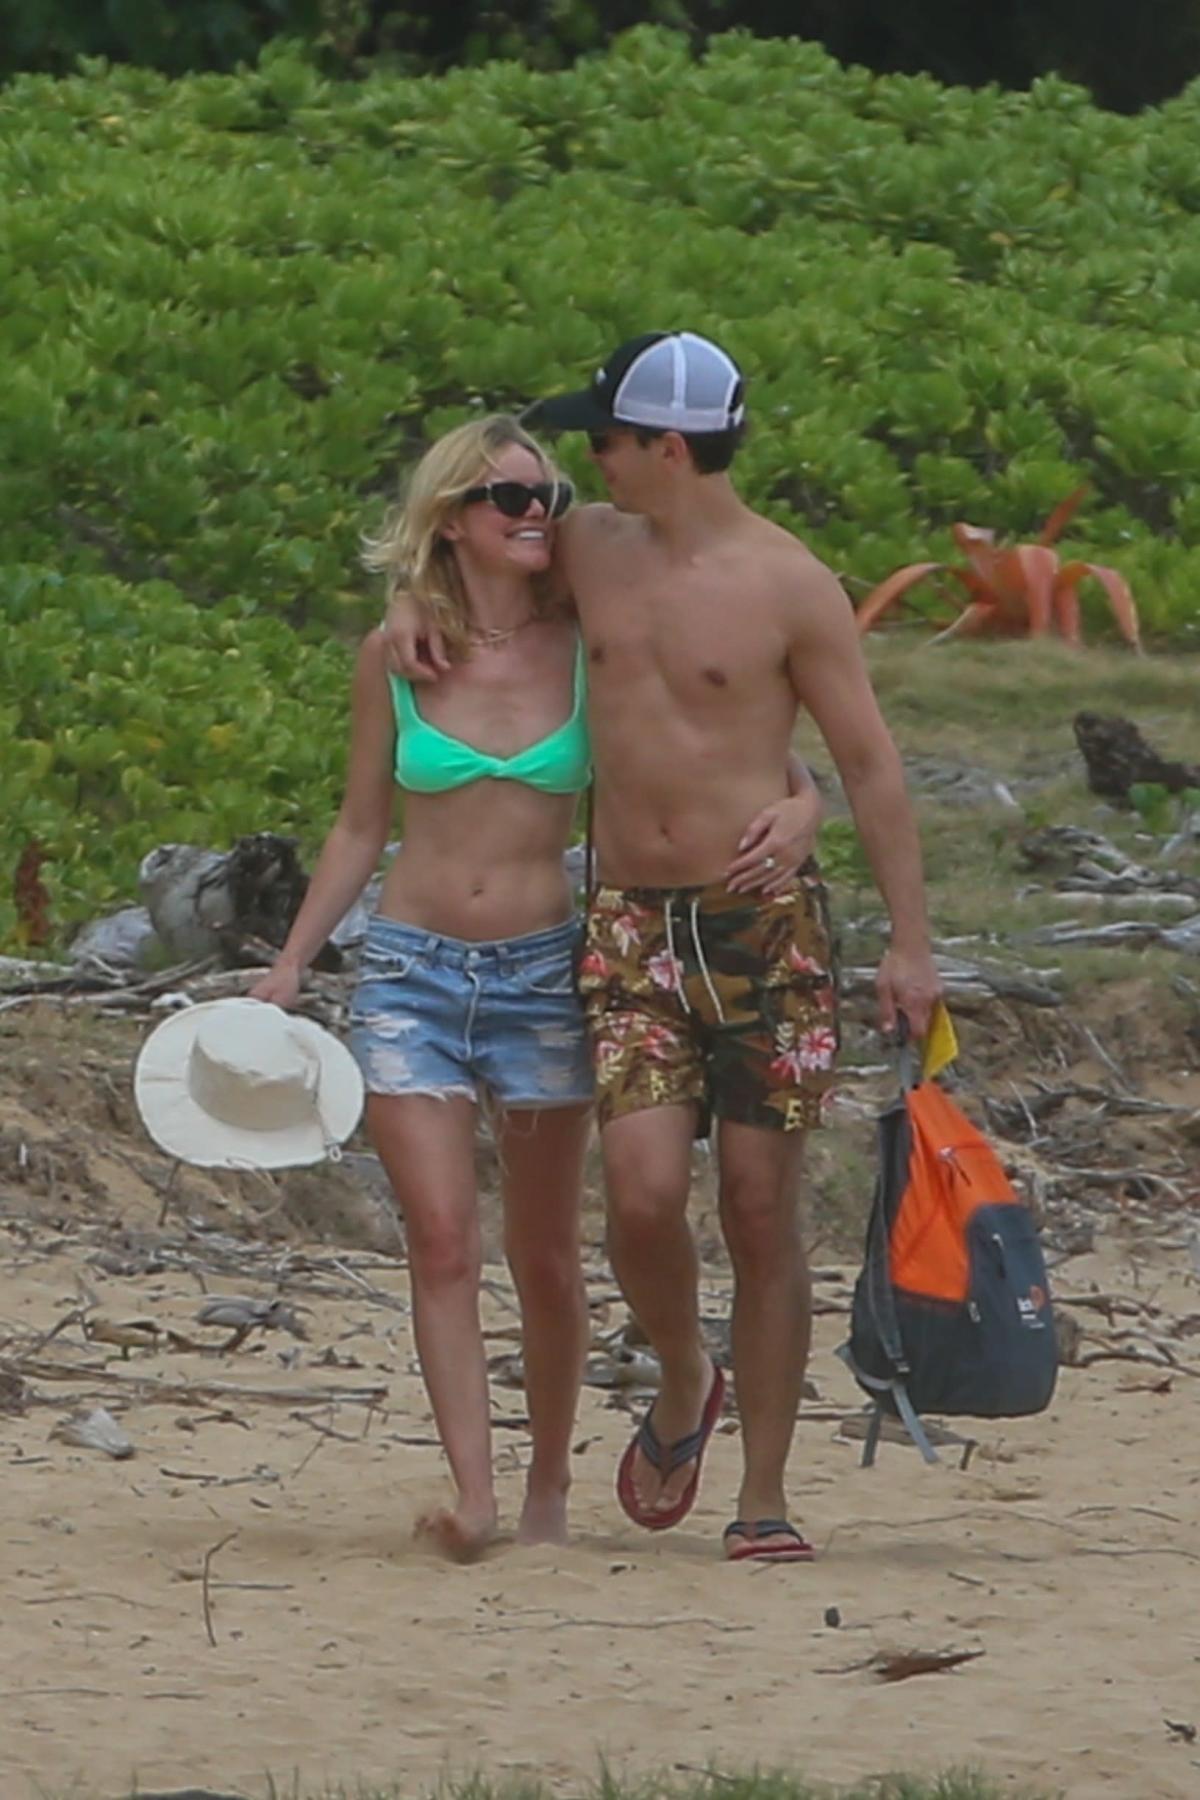 Kate Bosworth and Justin Long show major PDA on Hawaii beach [Video]